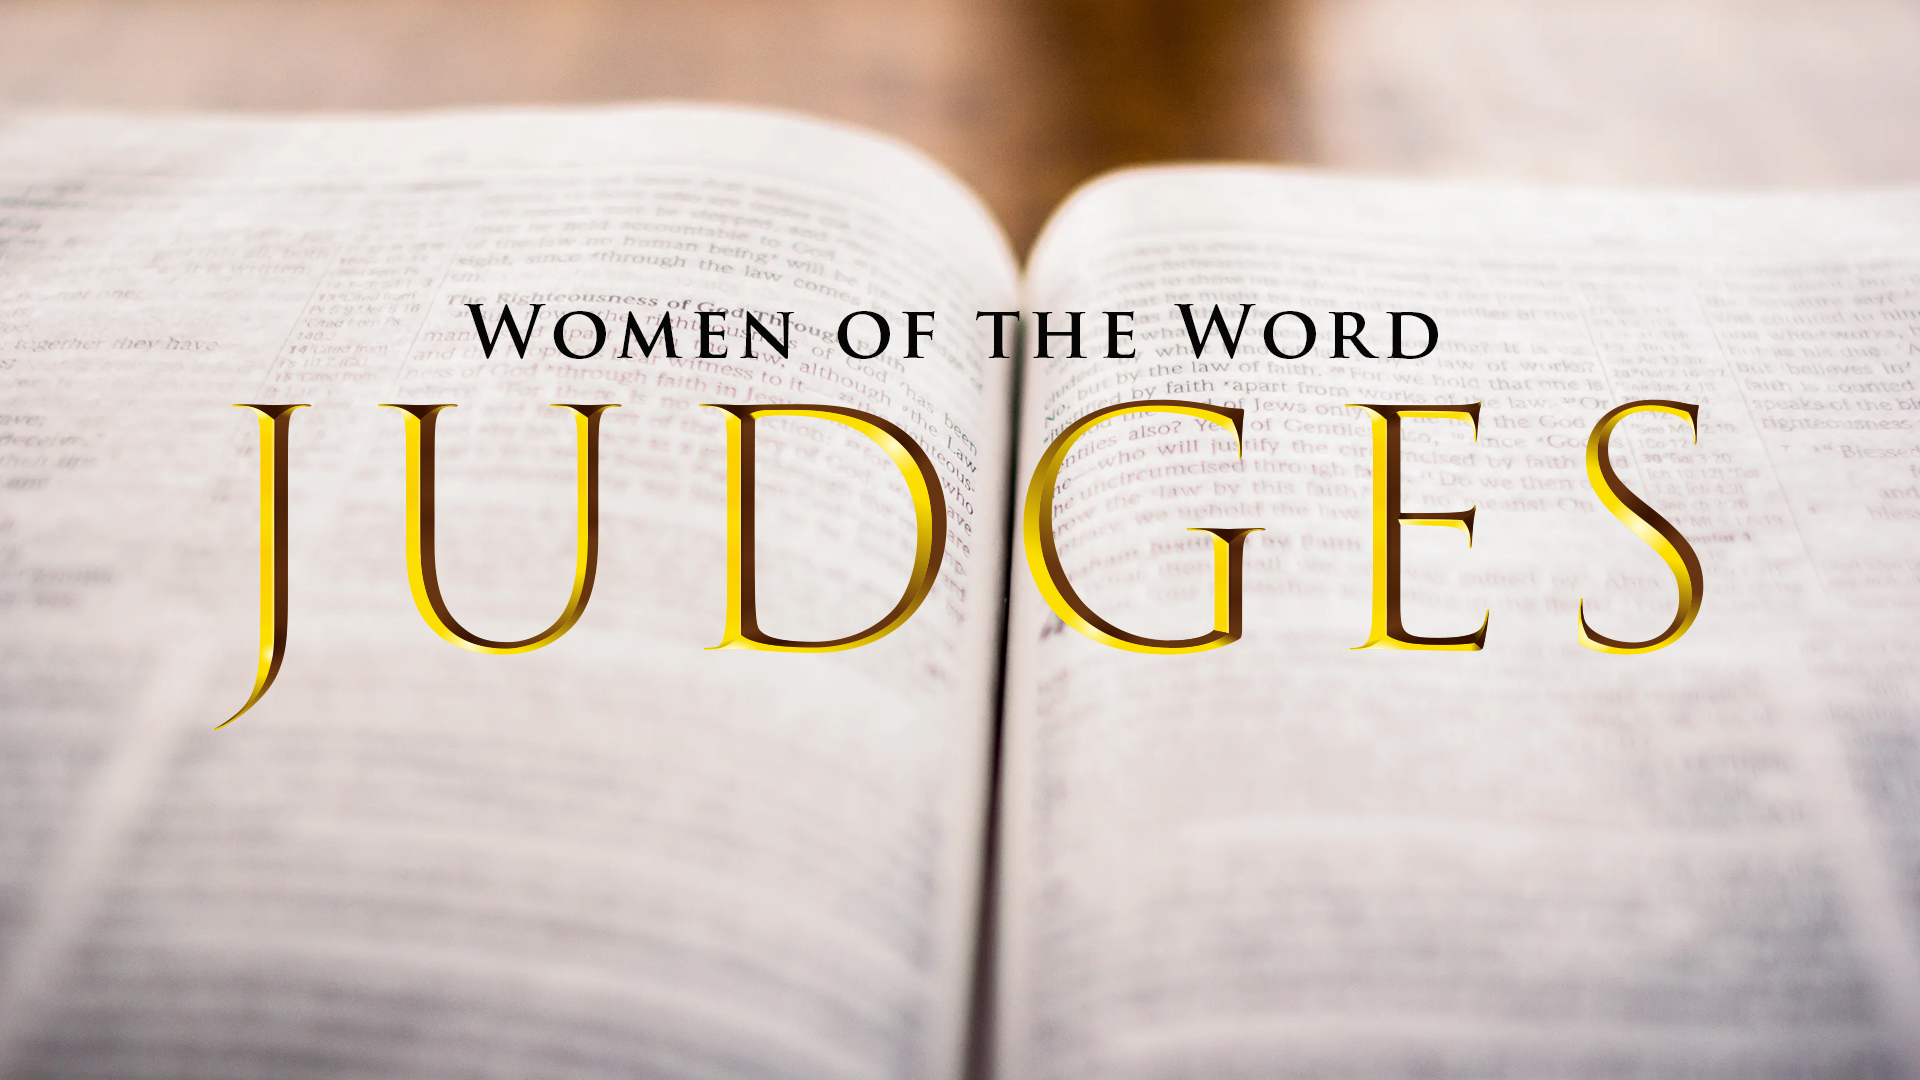 Women in the Word
Tuesdays, 2:30 p.m., Room 114
